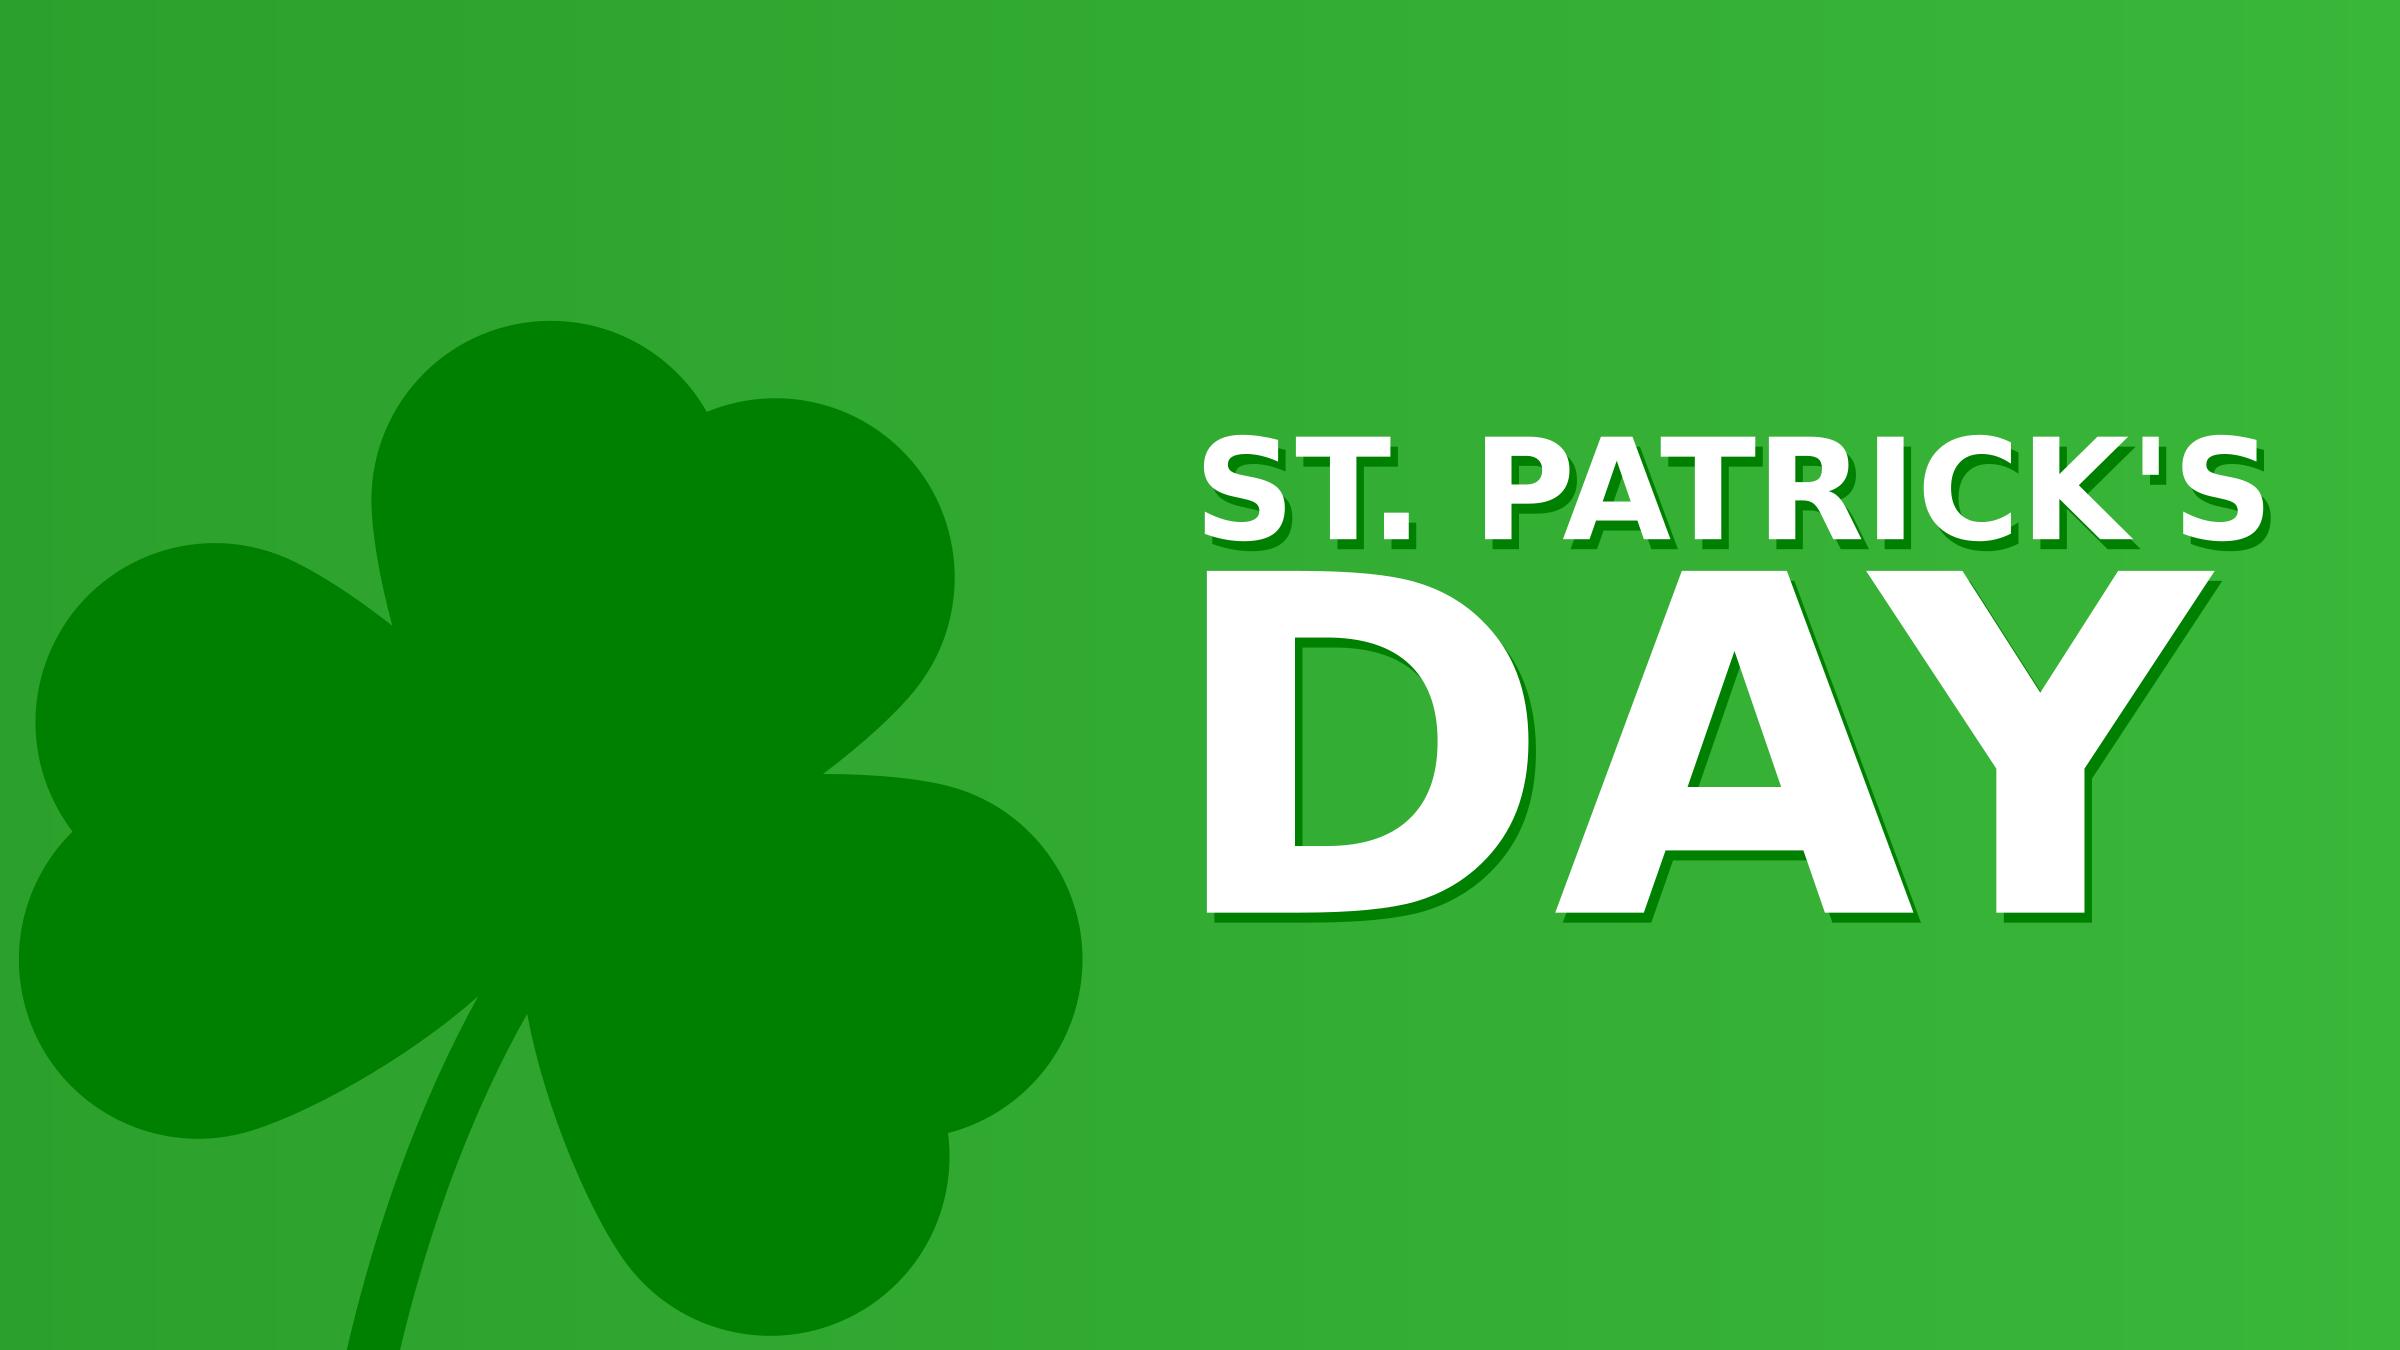 St. Patrick's Day Minimalist Featured Image 16:9 icons